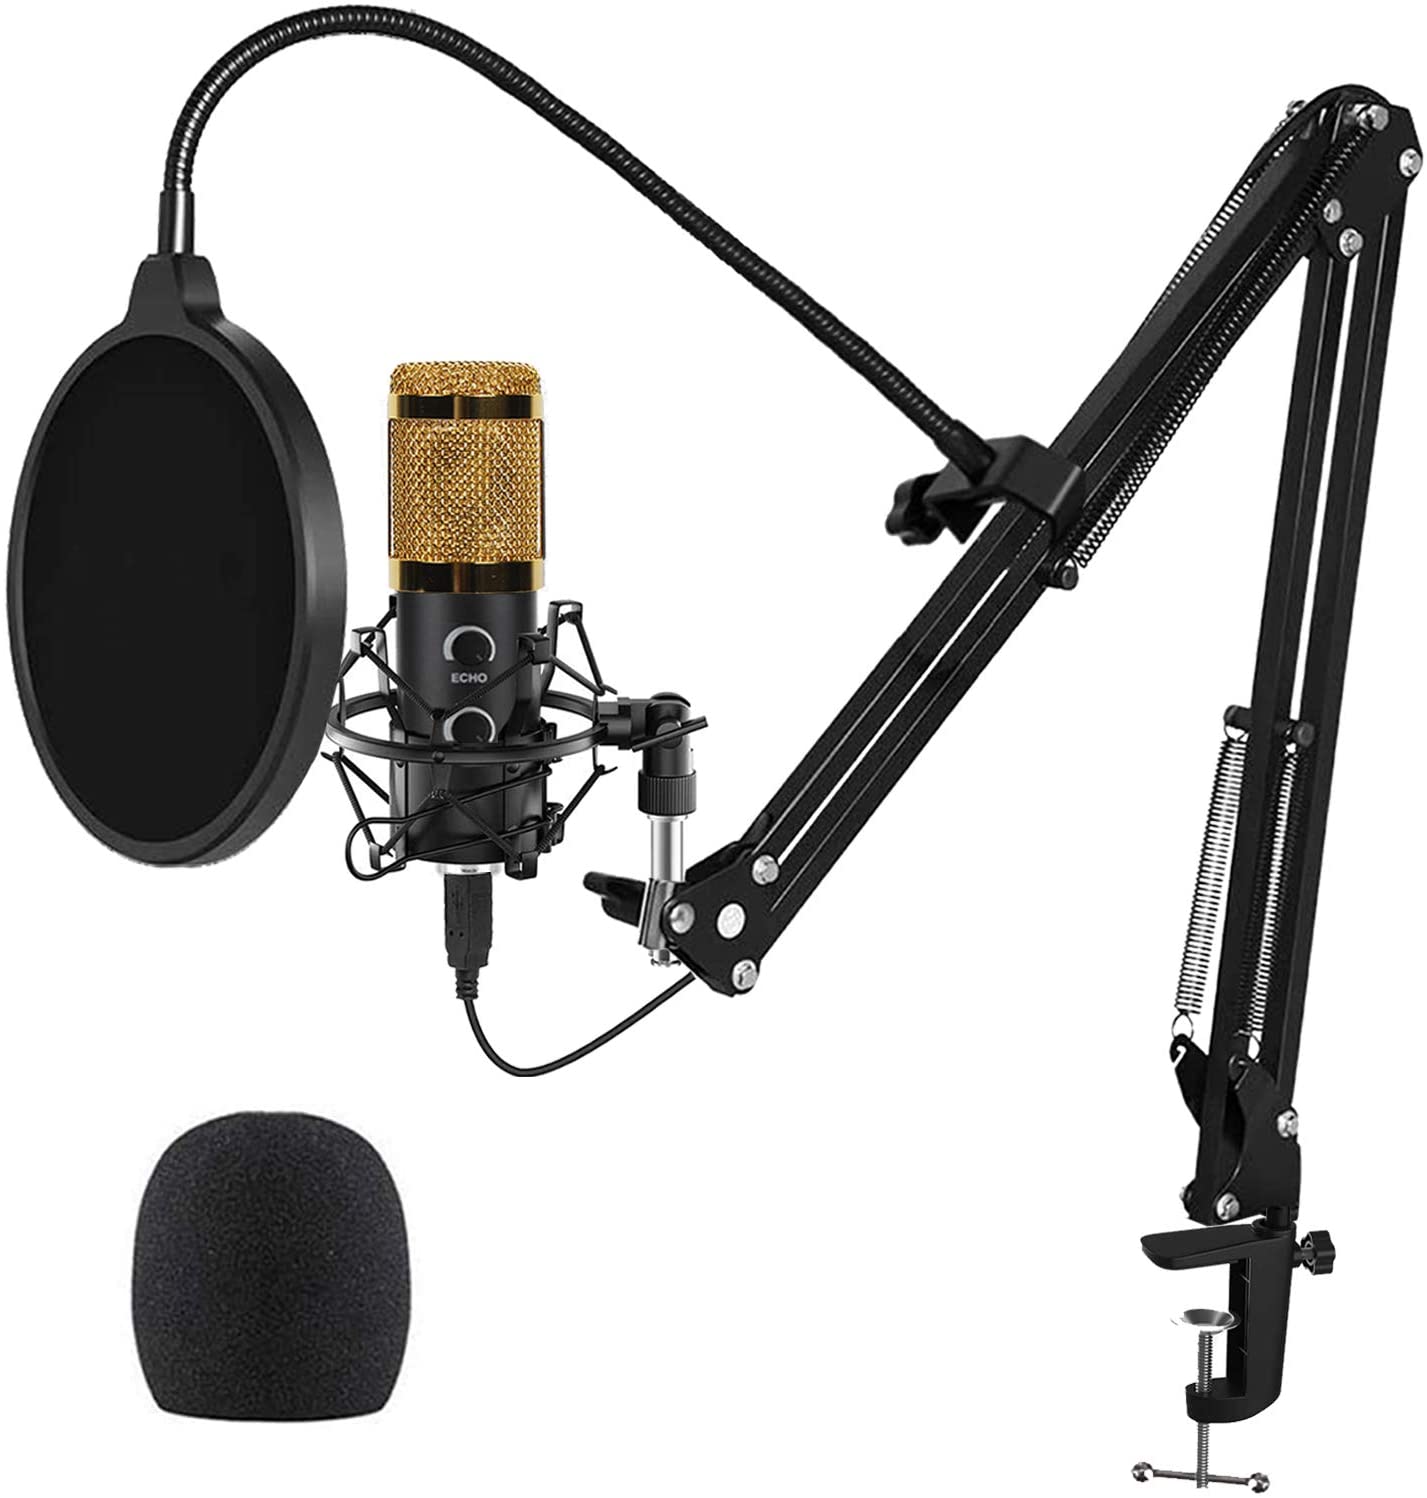 2023 Upgraded USB Microphone for Computer, Mic for Gaming, Podcast, Live Streaming, YouTube on PC, Mic Studio Bundle with Adjustment Arm Stand, Fits for Windows & Mac PC, Plug &amp; Play Design, Black